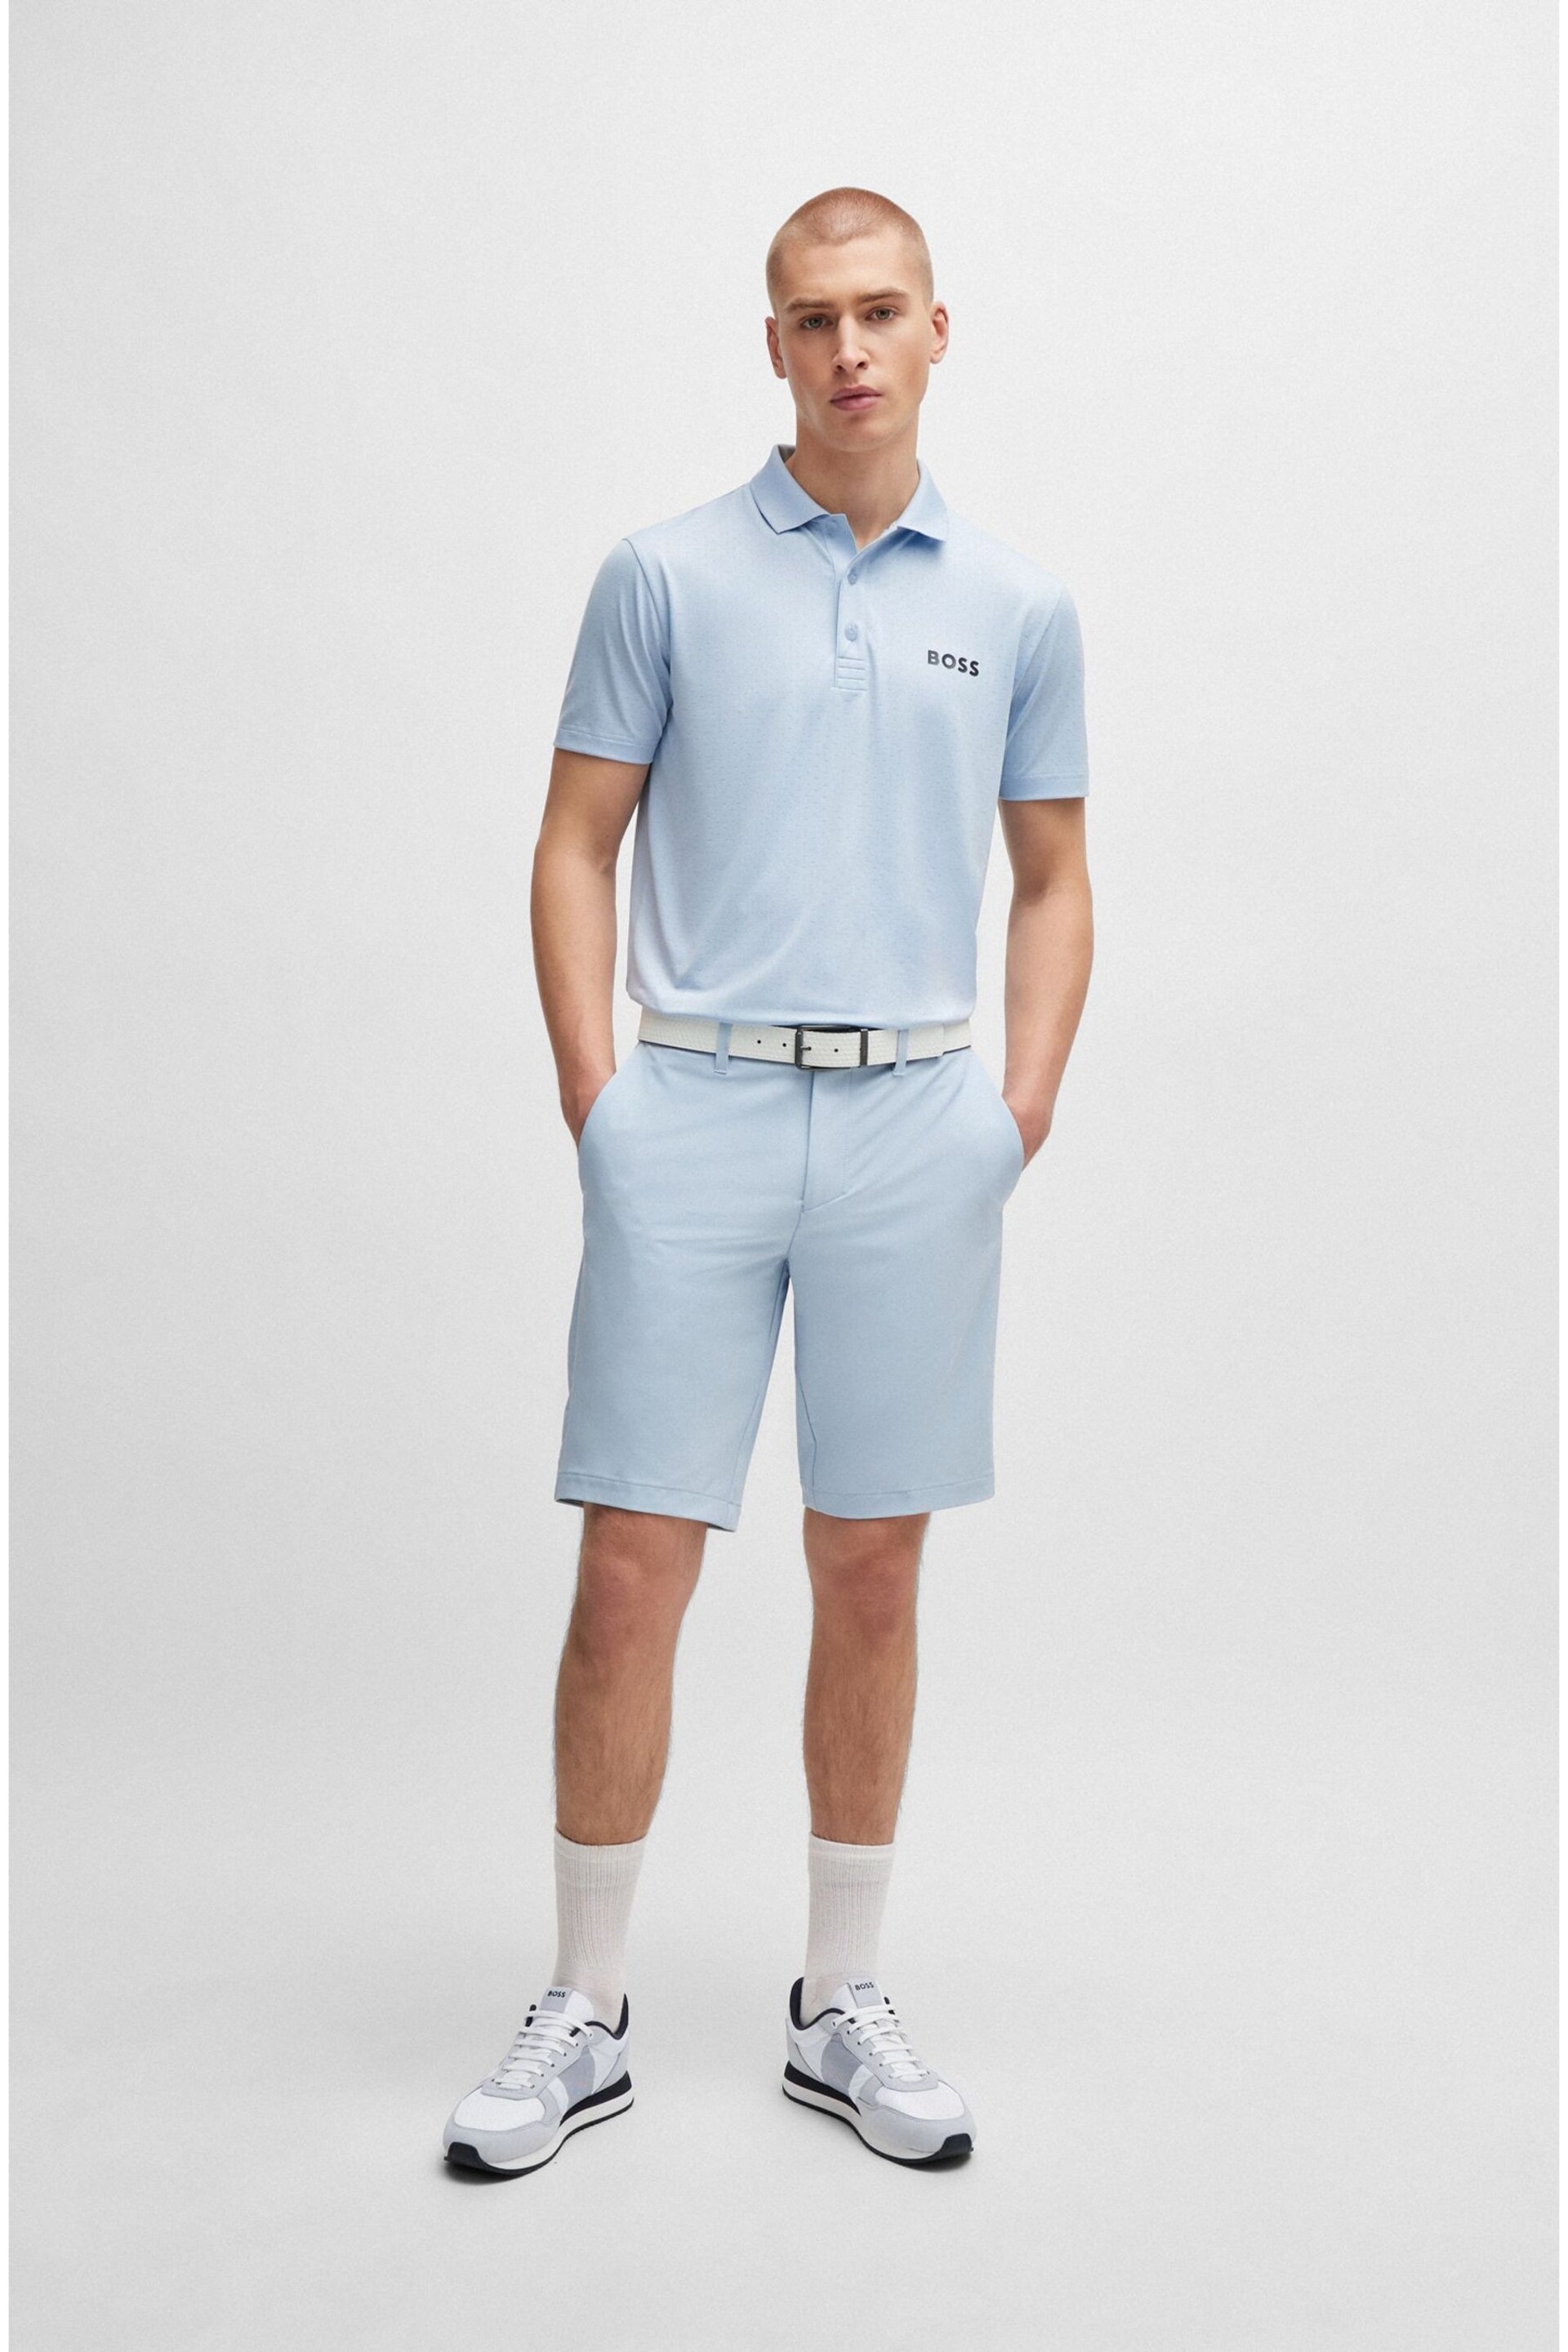 BOSS Light Blue Slim Fit Shorts in Water Repellent Easy Iron Fabric - Image 3 of 5